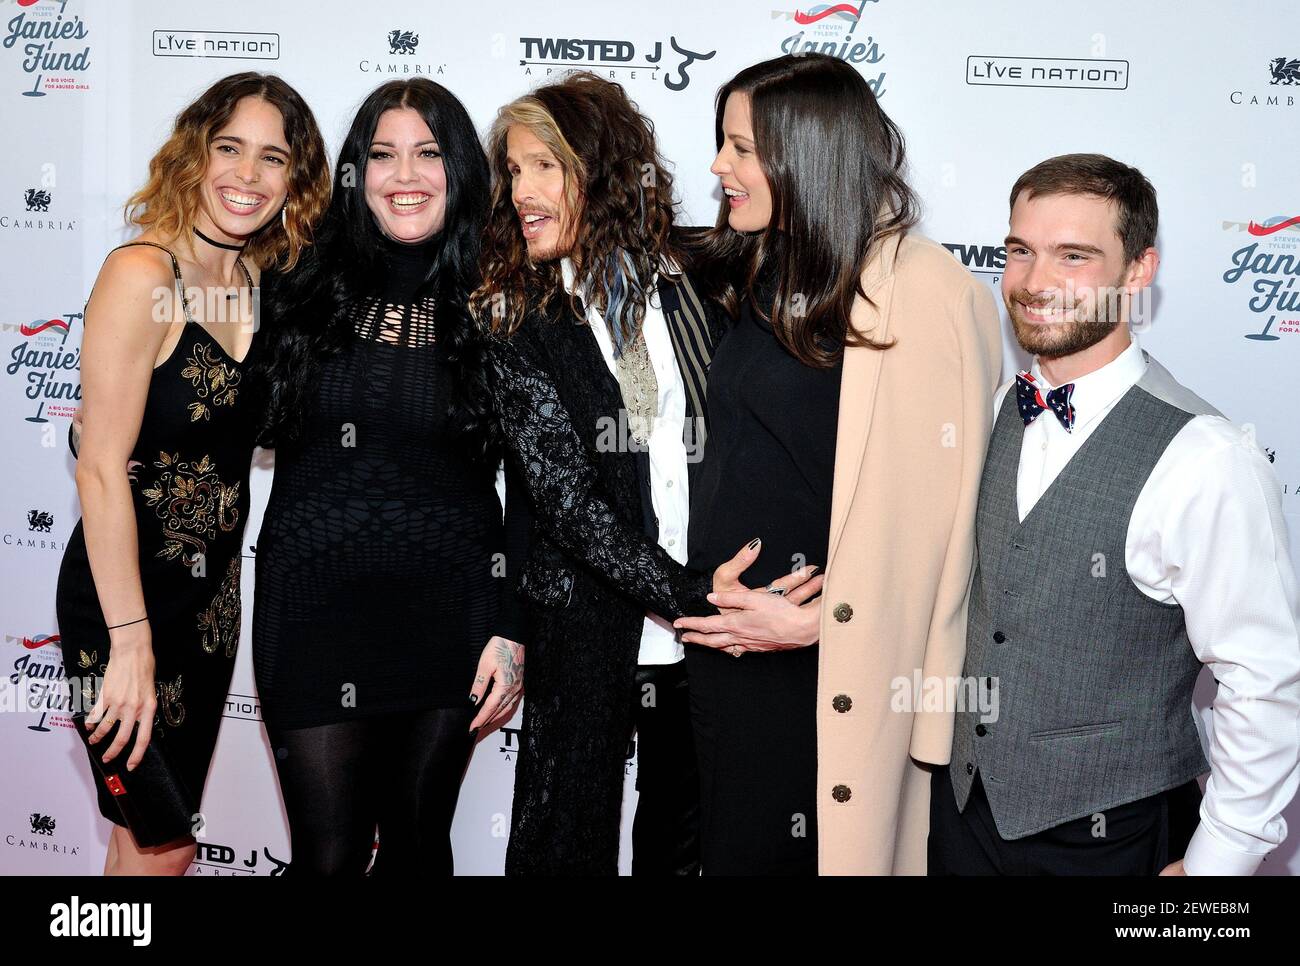 L-R: Siblings Chelsea, Mia and Liv Tyler and Taj Talerico attend